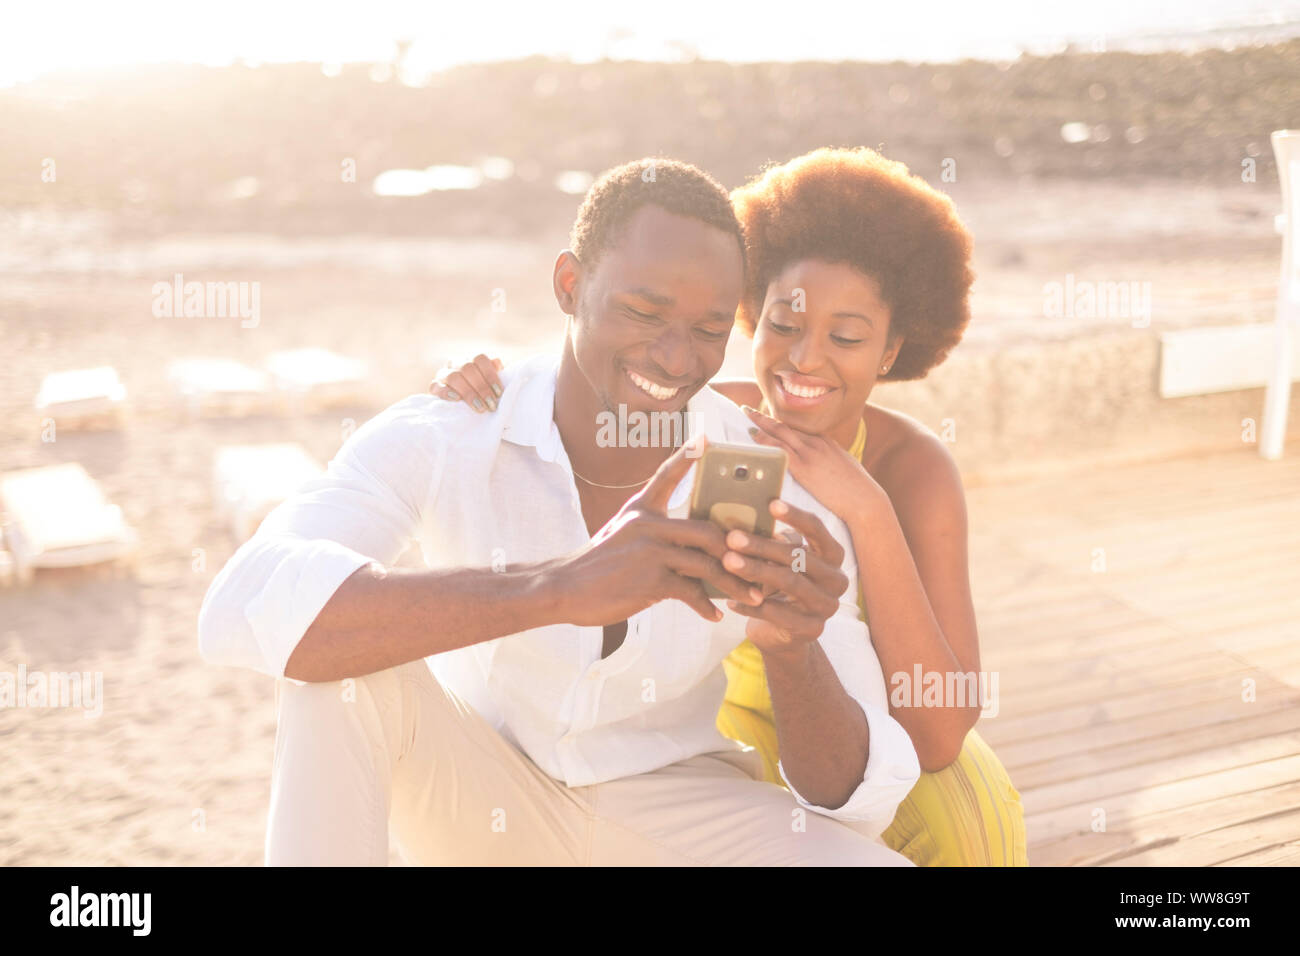 young happy couple afro American afro race multi-ethnic racial diversity enjoy phone and internet in outdoor leisure activity during the bright and golden sunset with light in background, smile and stay together Stock Photo